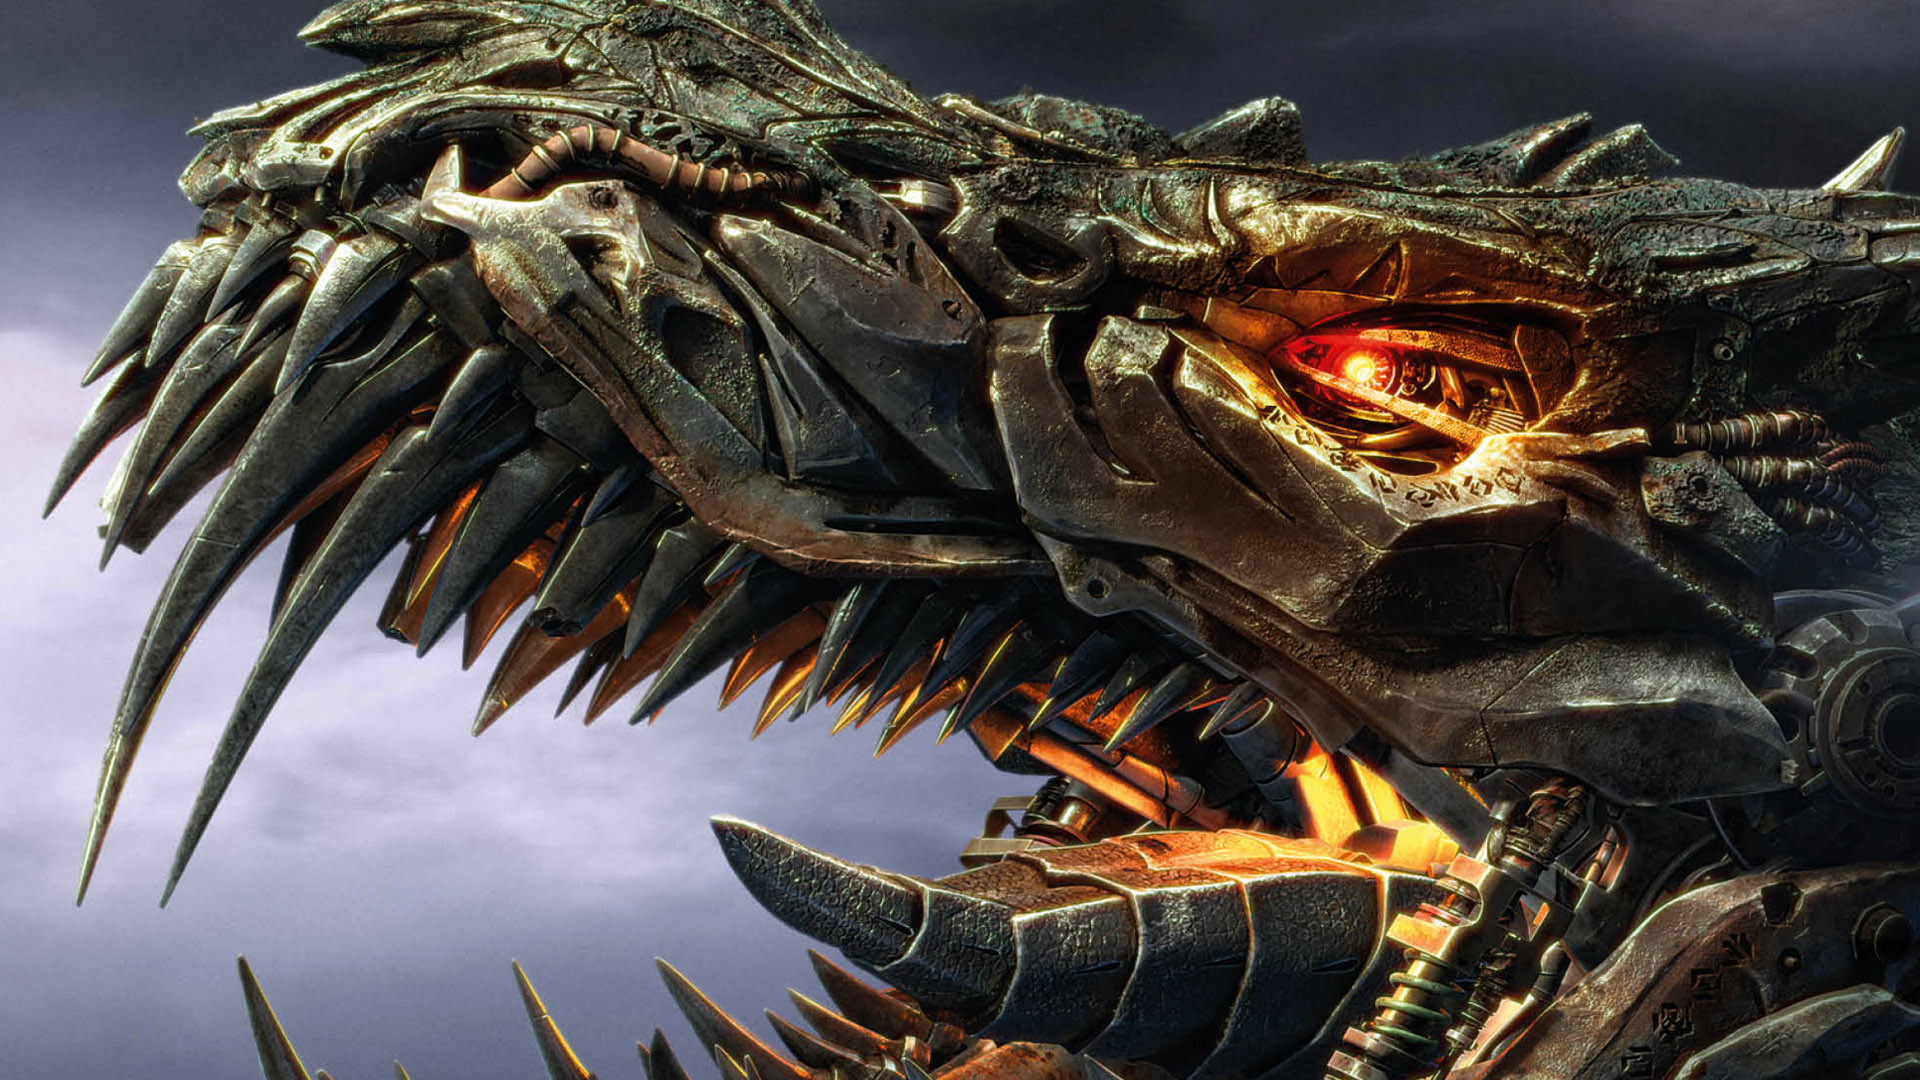 Grimlock Jaws From Transformers 4 Age Of Extinction - Transformers 4 Grimlock Wallpaper Hd - HD Wallpaper 